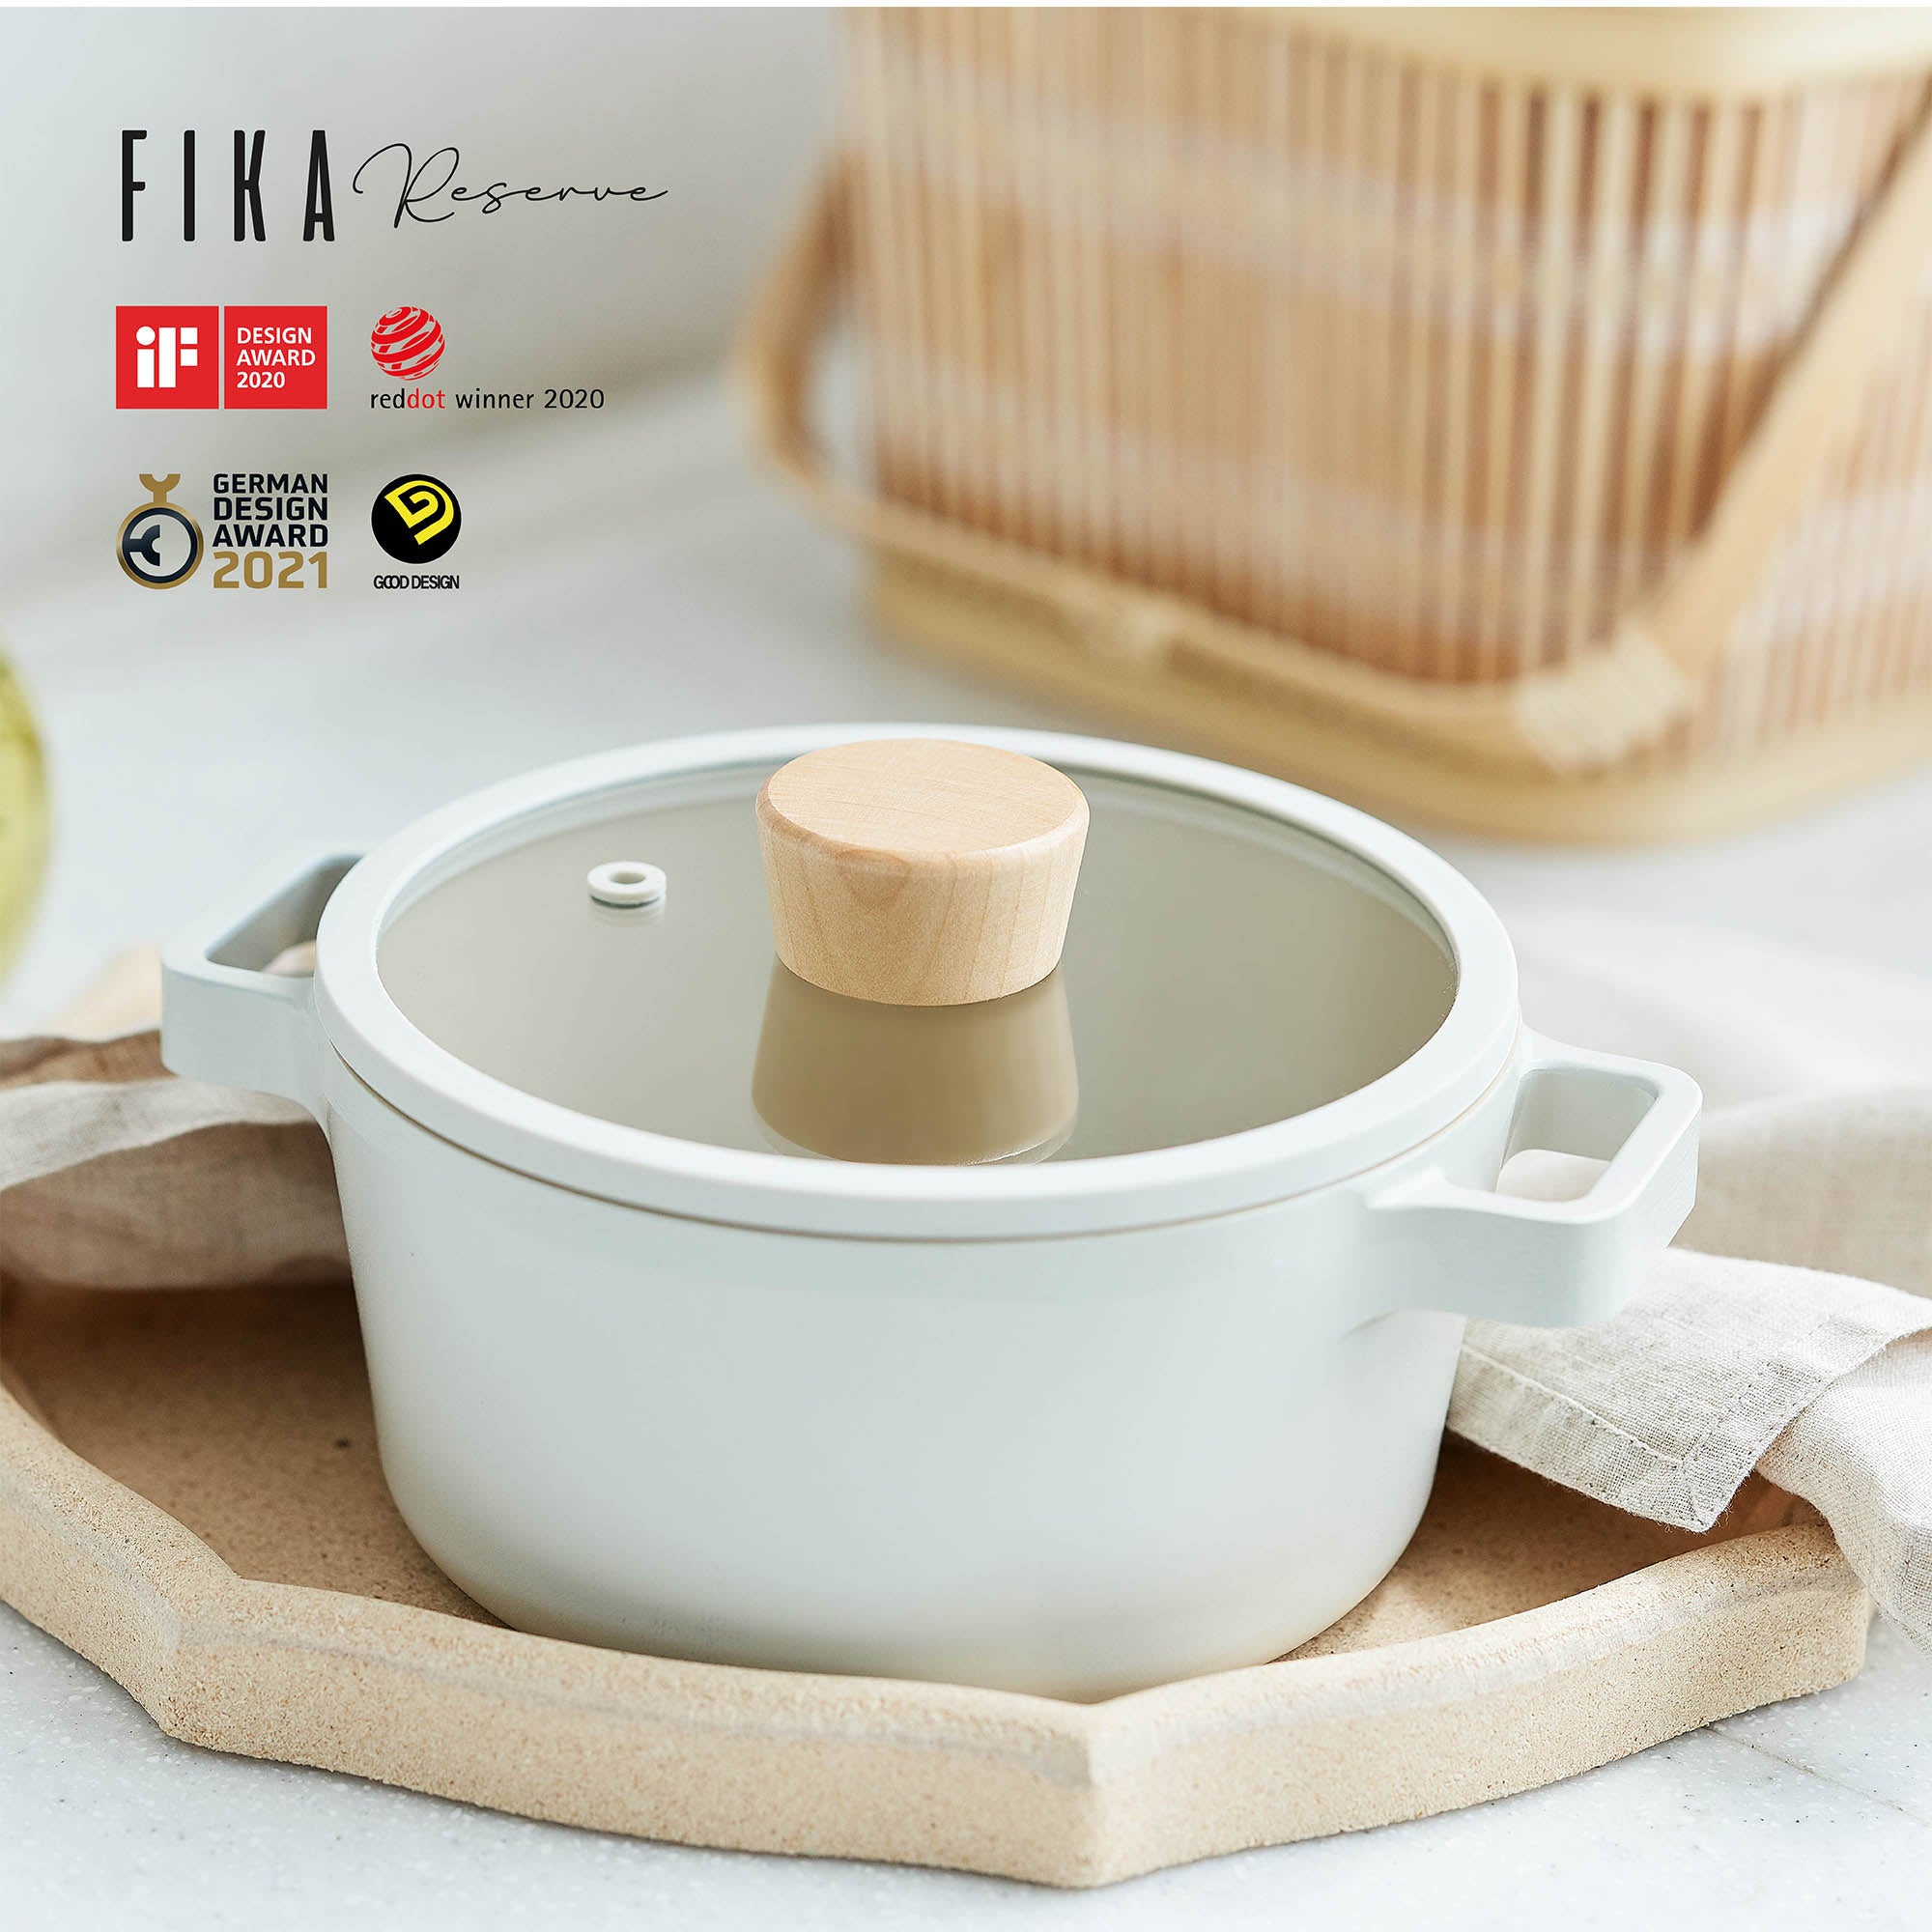 My first Neoflam FIKA cookware set! Bought them early October 2021